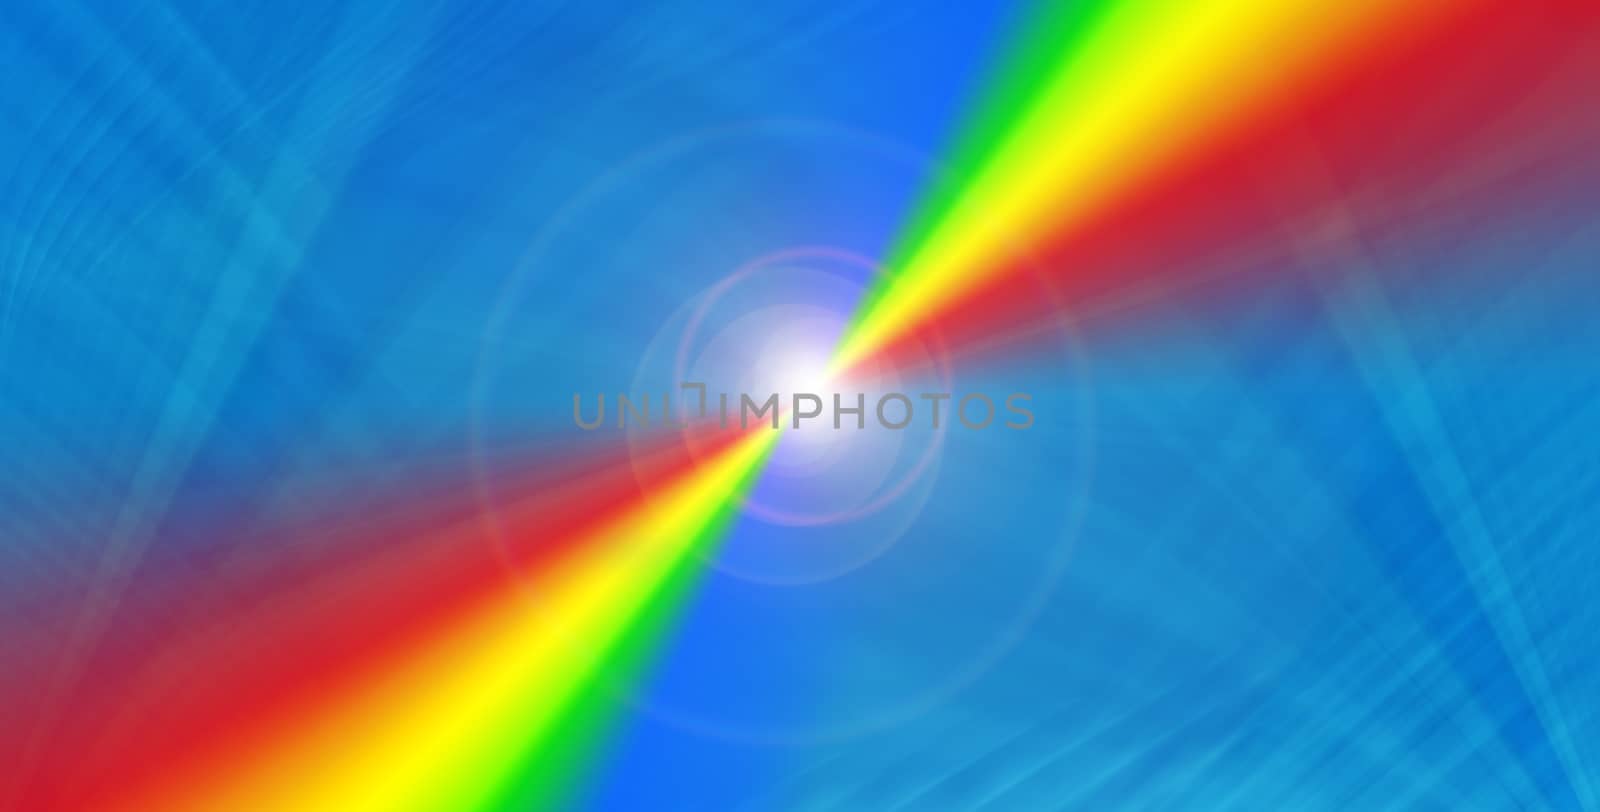 Rainbow on a blue  background with flare.